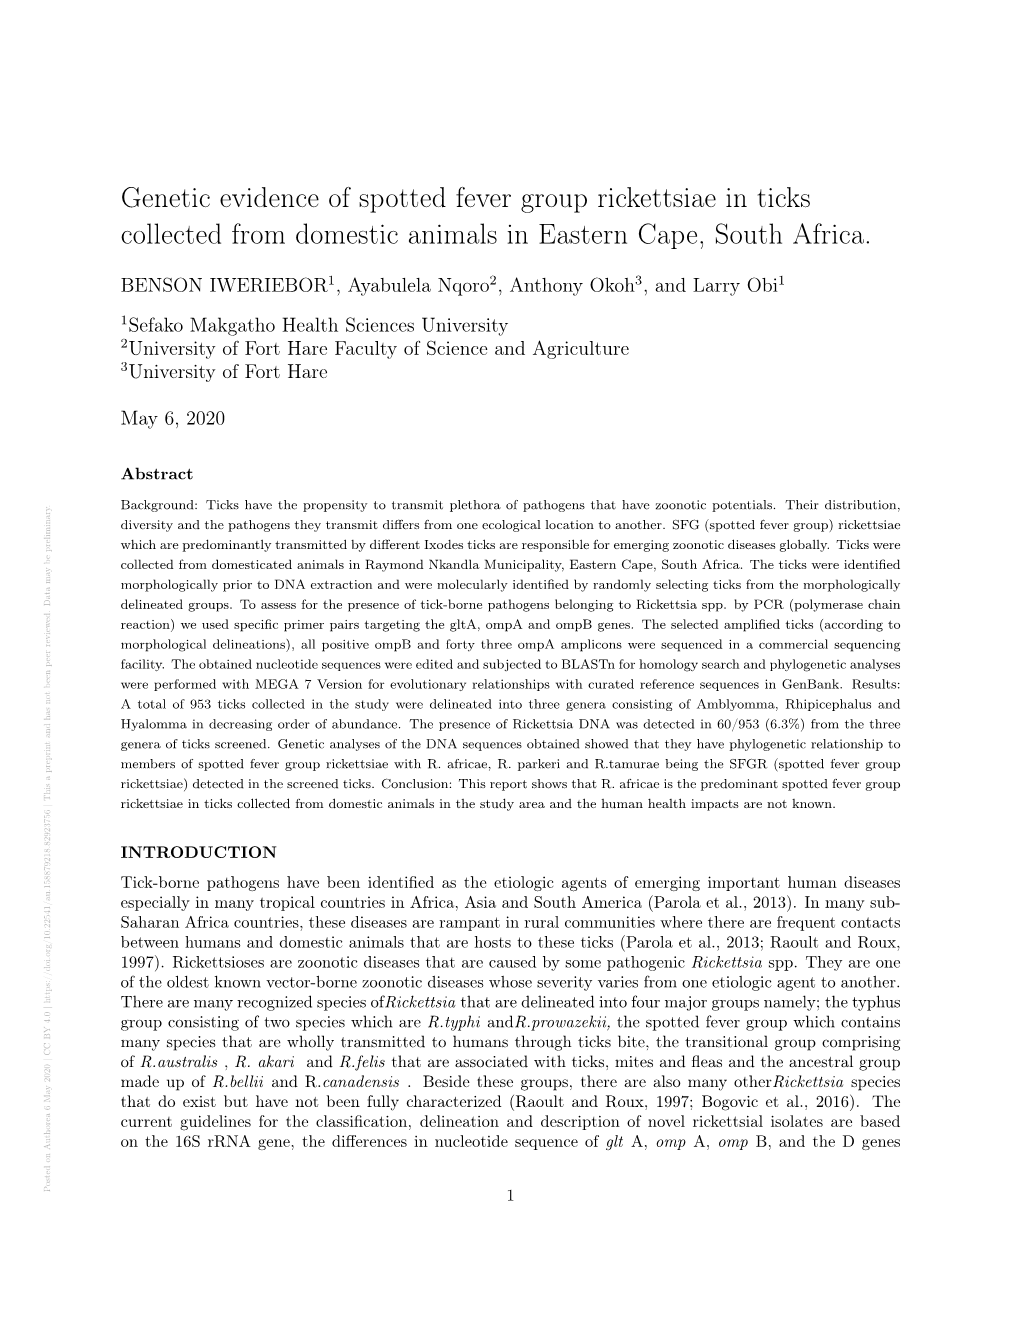 Genetic Evidence of Spotted Fever Group Rickettsiae in Ticks Collected